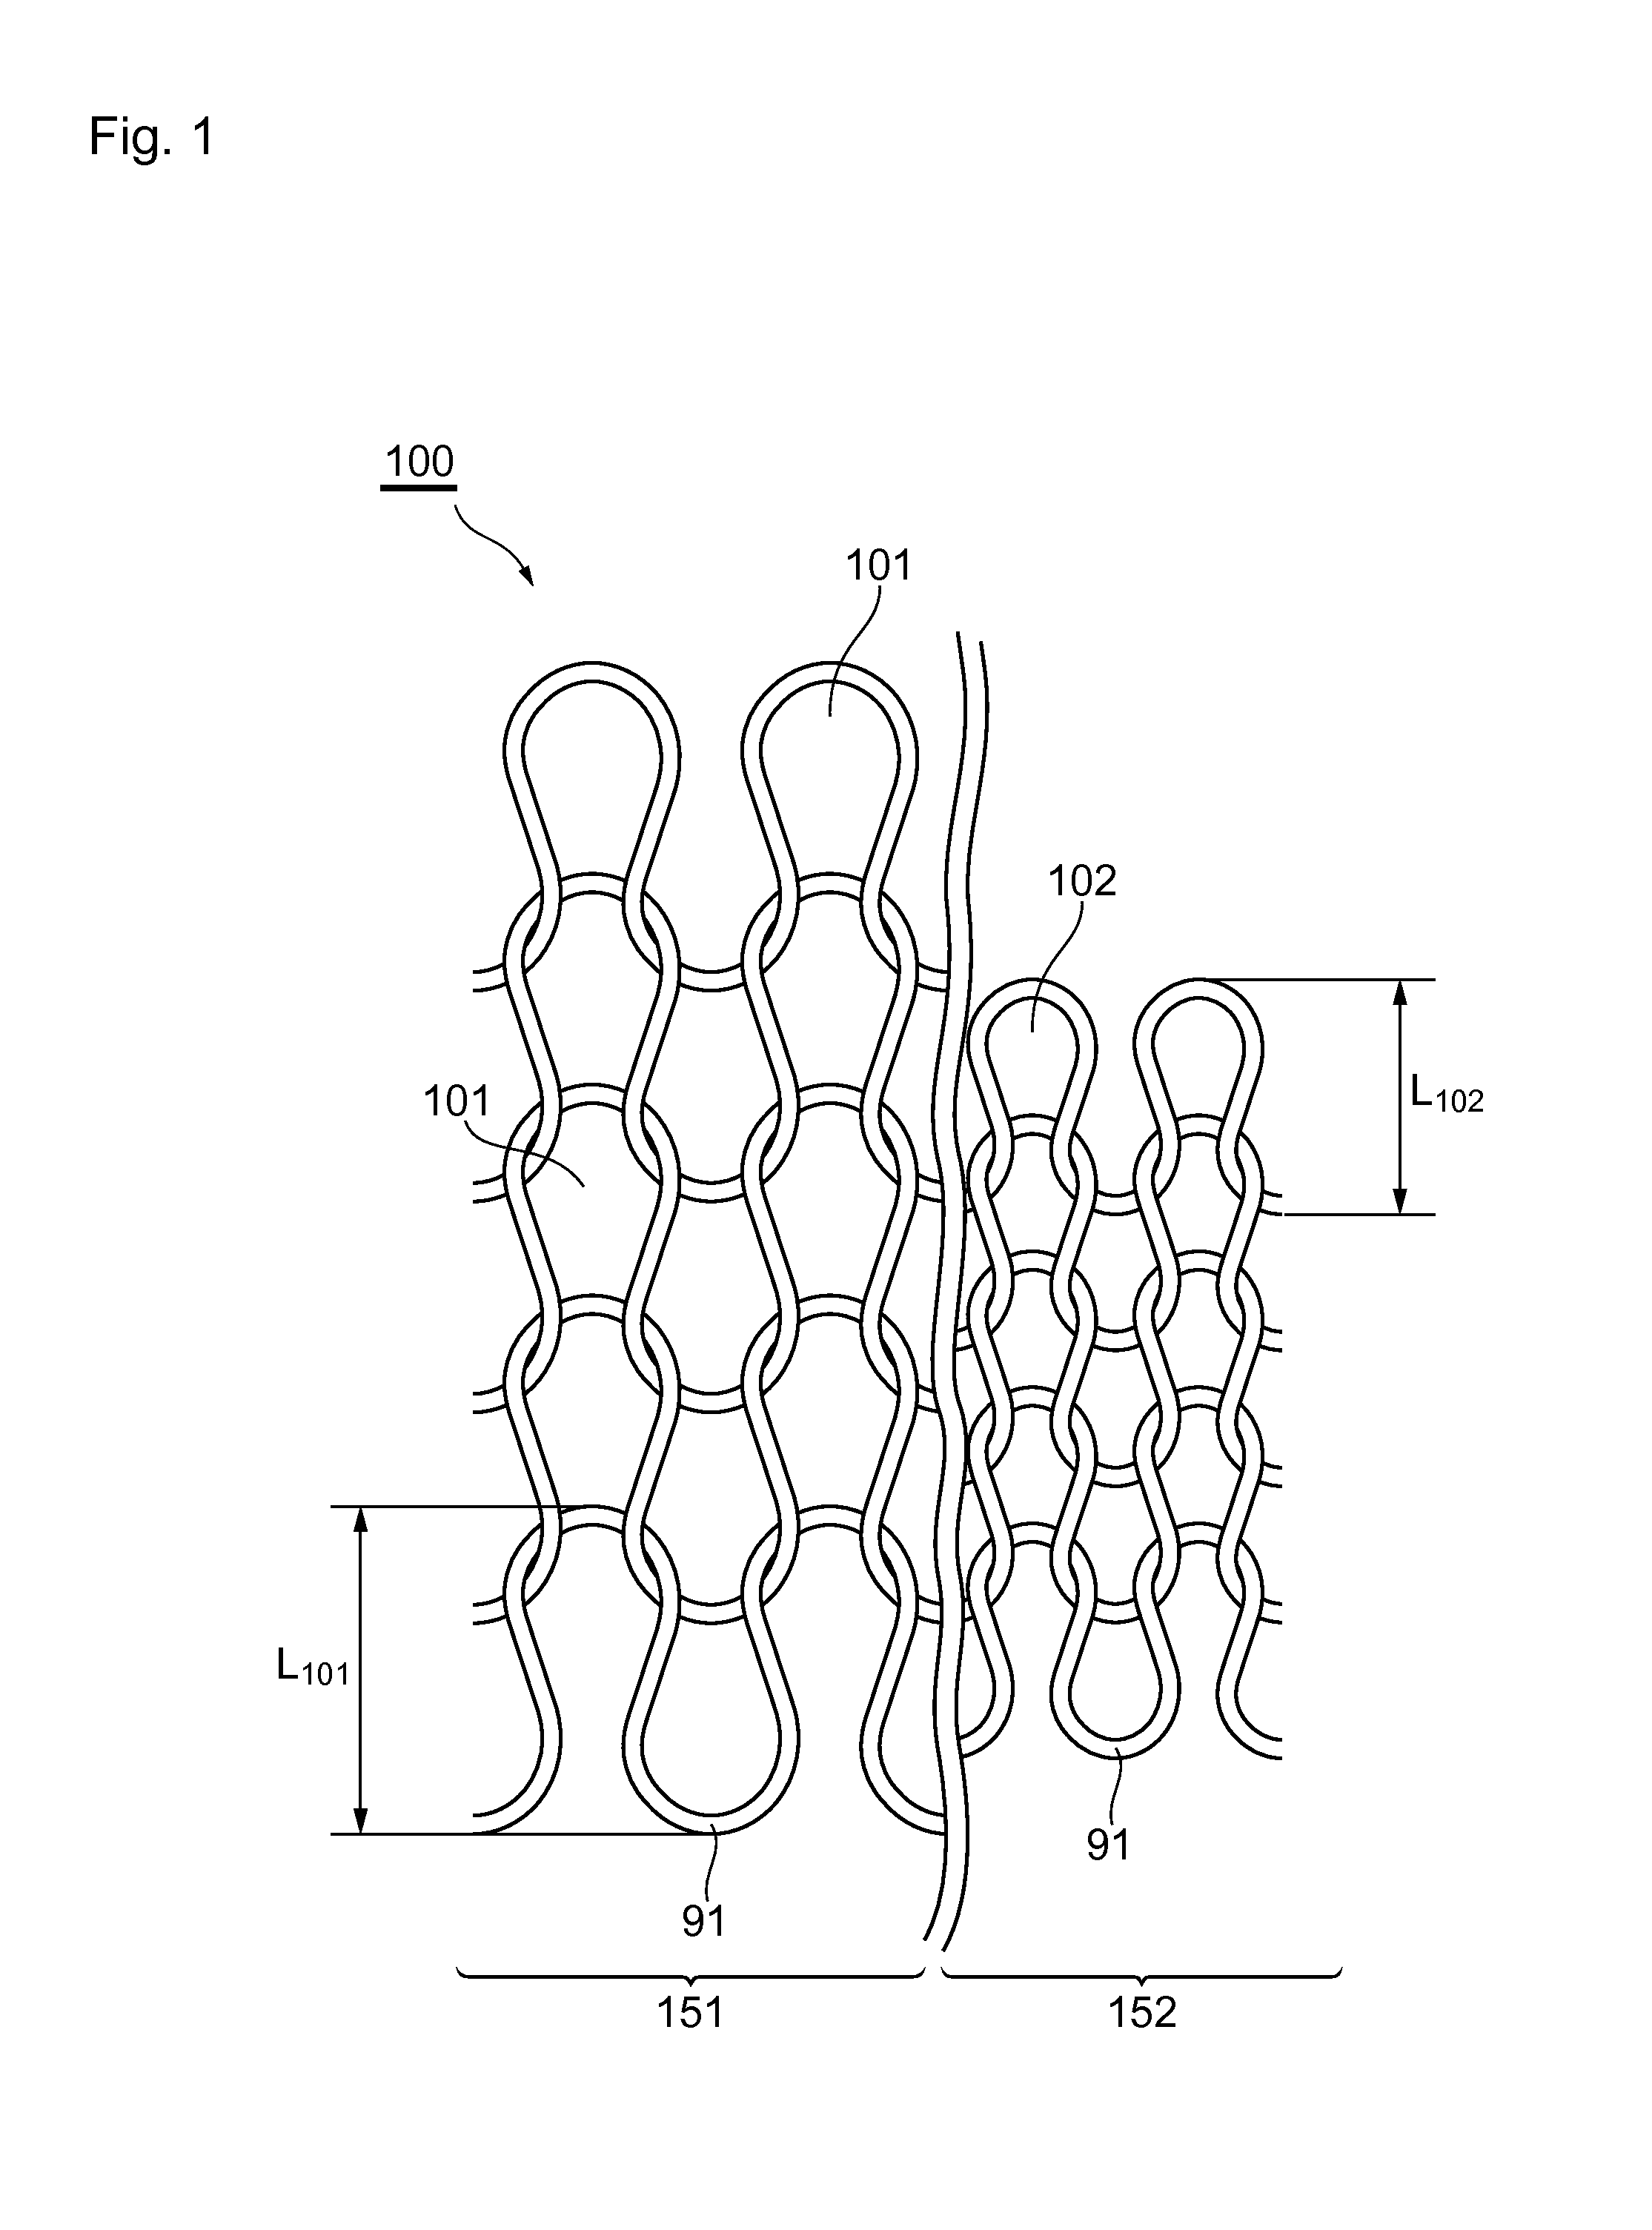 Stitch-size controlled knit product